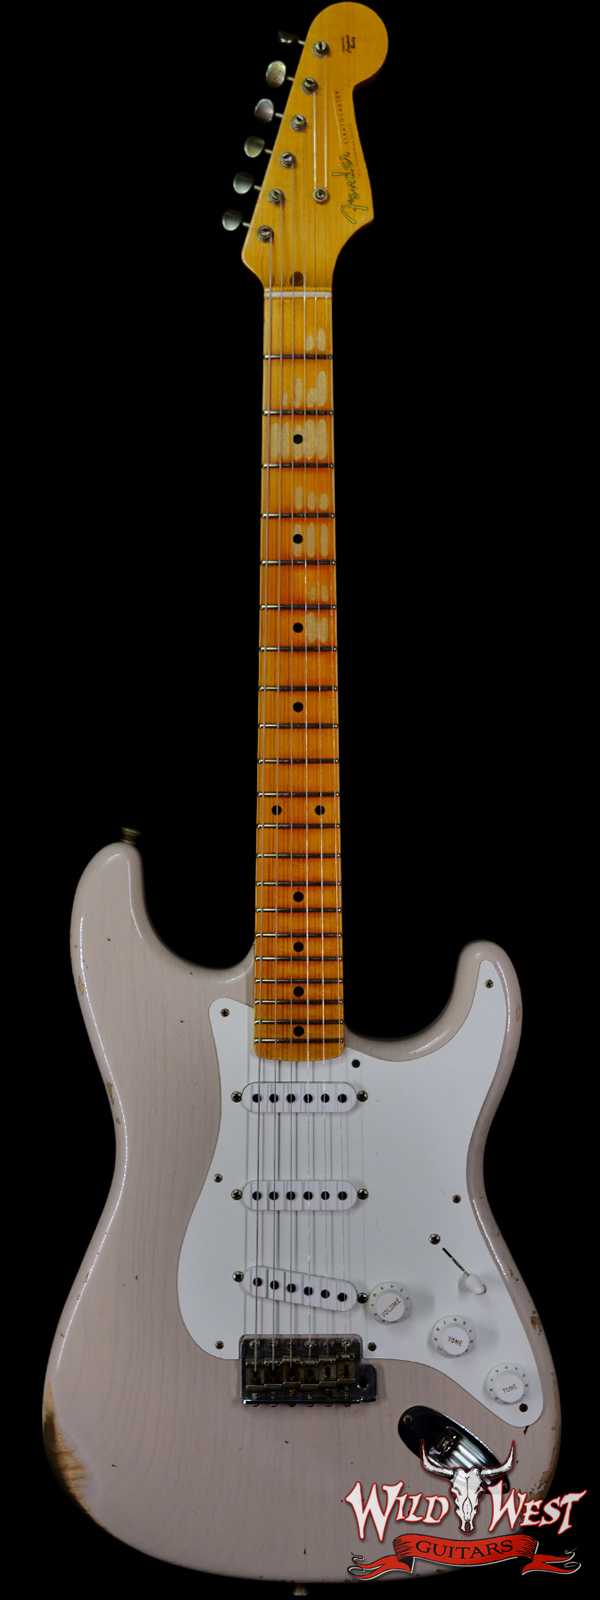 Fender Custom Shop 1955 Stratocaster Relic Quatersawn Maple Neck Hand-wound Pickups Dirty White Blonde